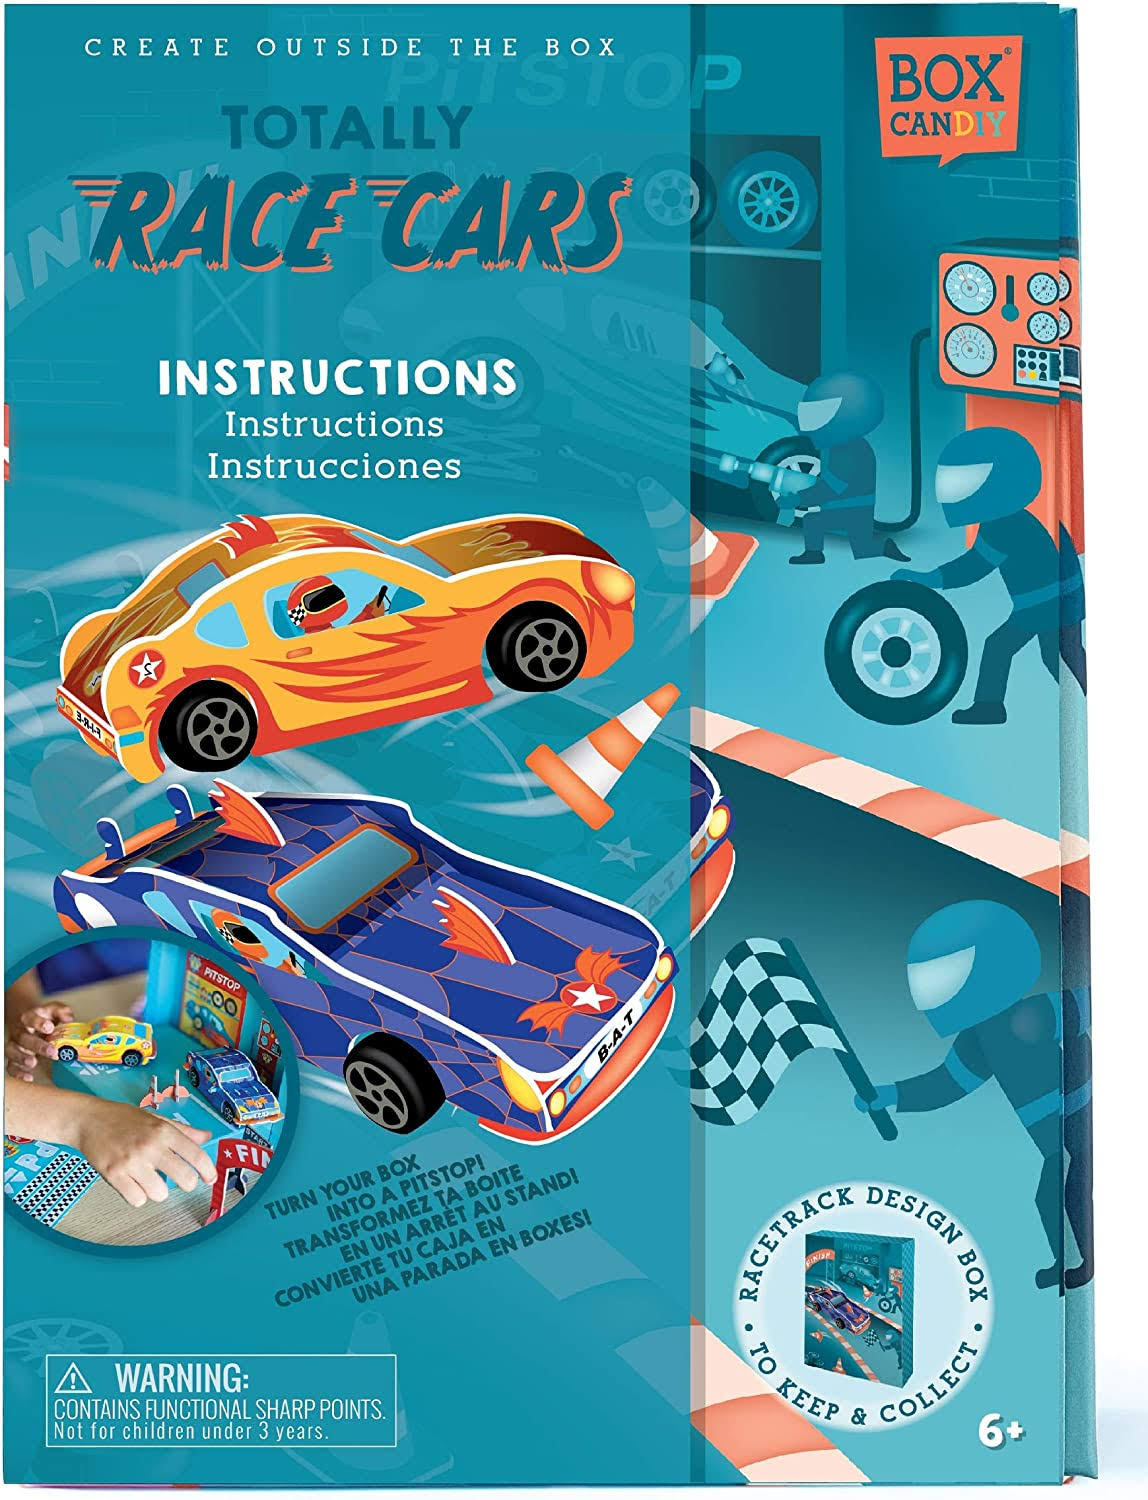 Box candiy Totally Race Cars Build and Go! Pull-back Car Racing Kit in